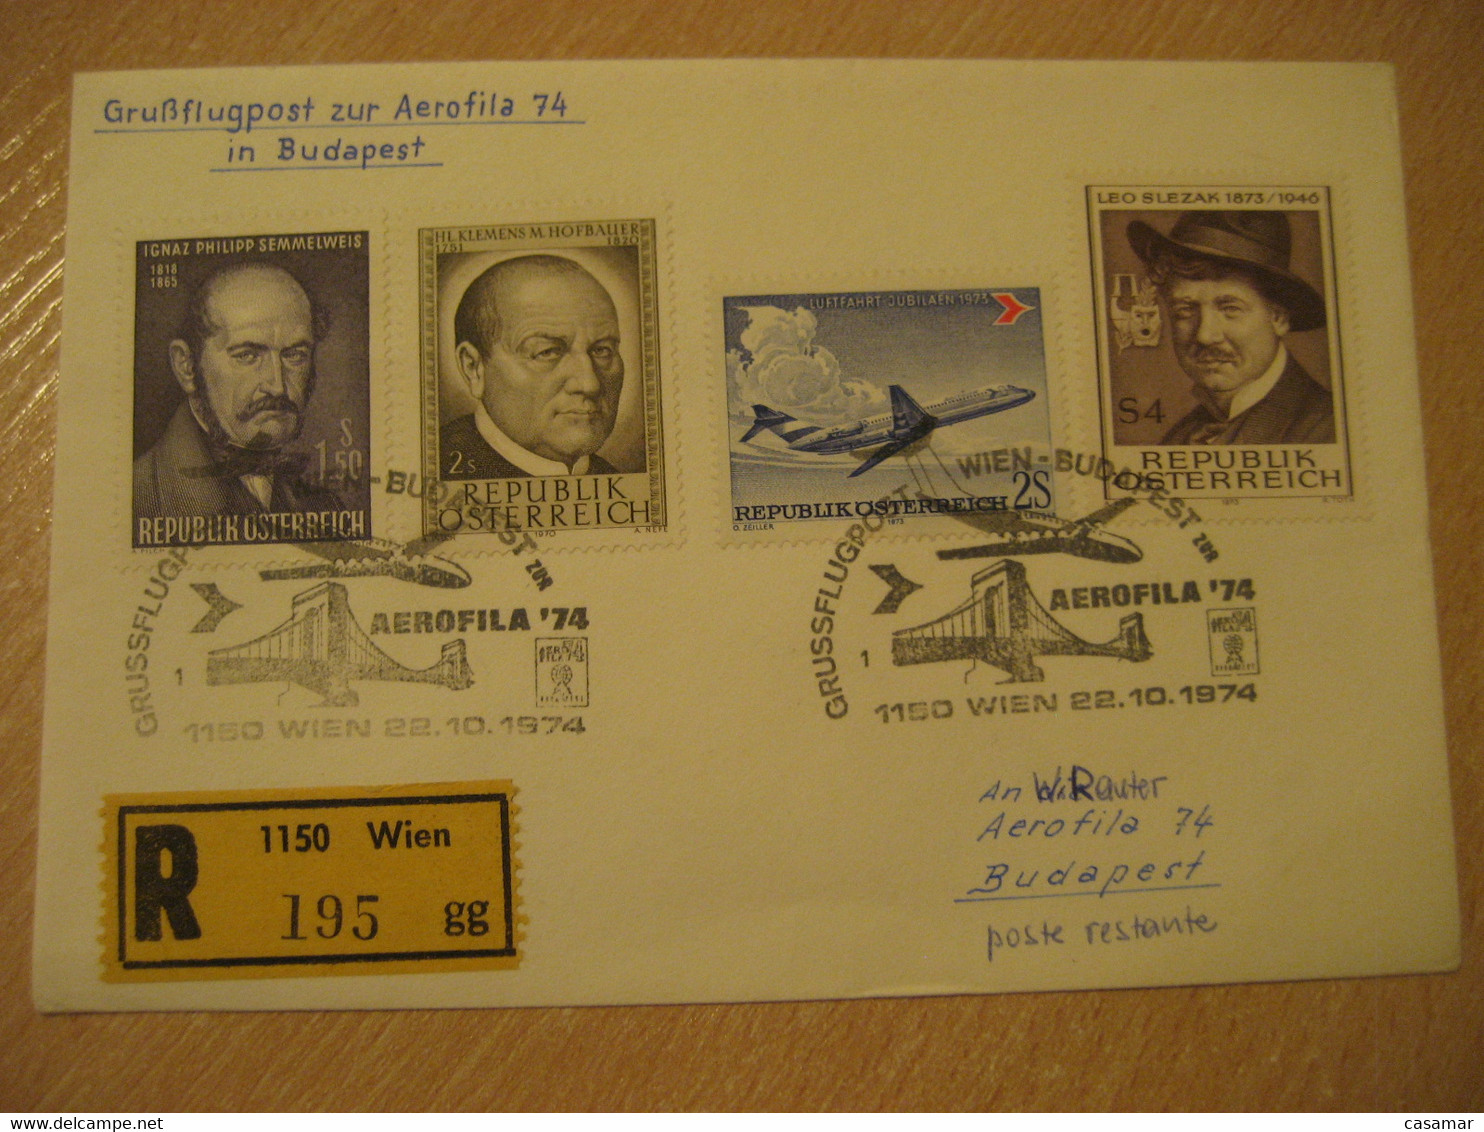 BUDAPEST Wien 1974 First Flight Cancel Registered Cover HUNGARY AUSTRIA - Covers & Documents